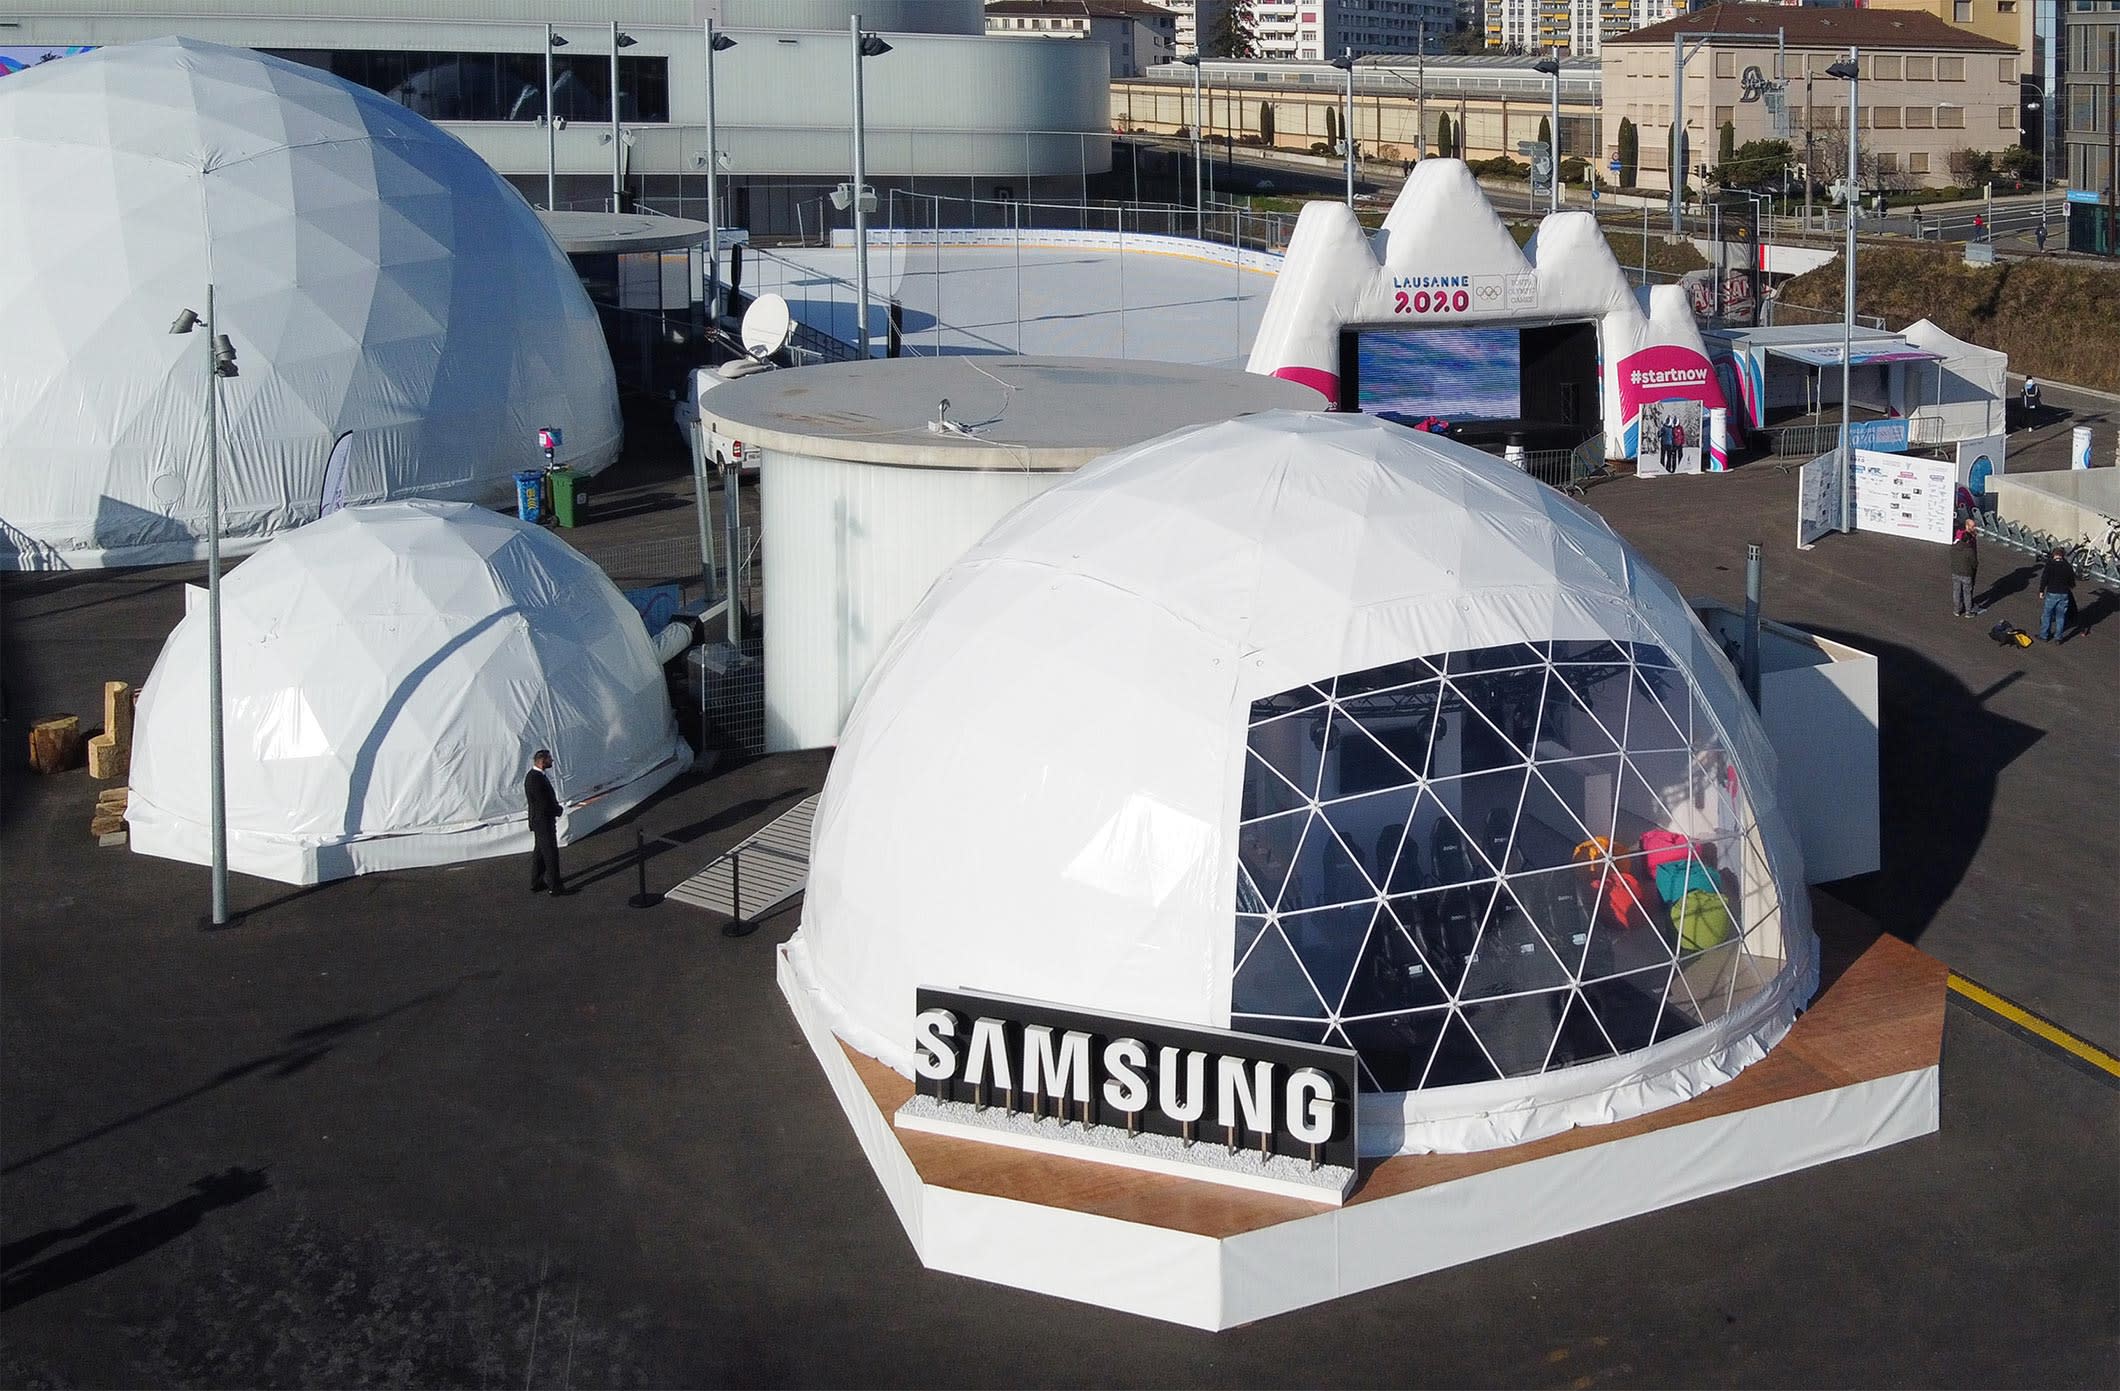 Samsung engaging with athletes and fans at Lausanne 2020